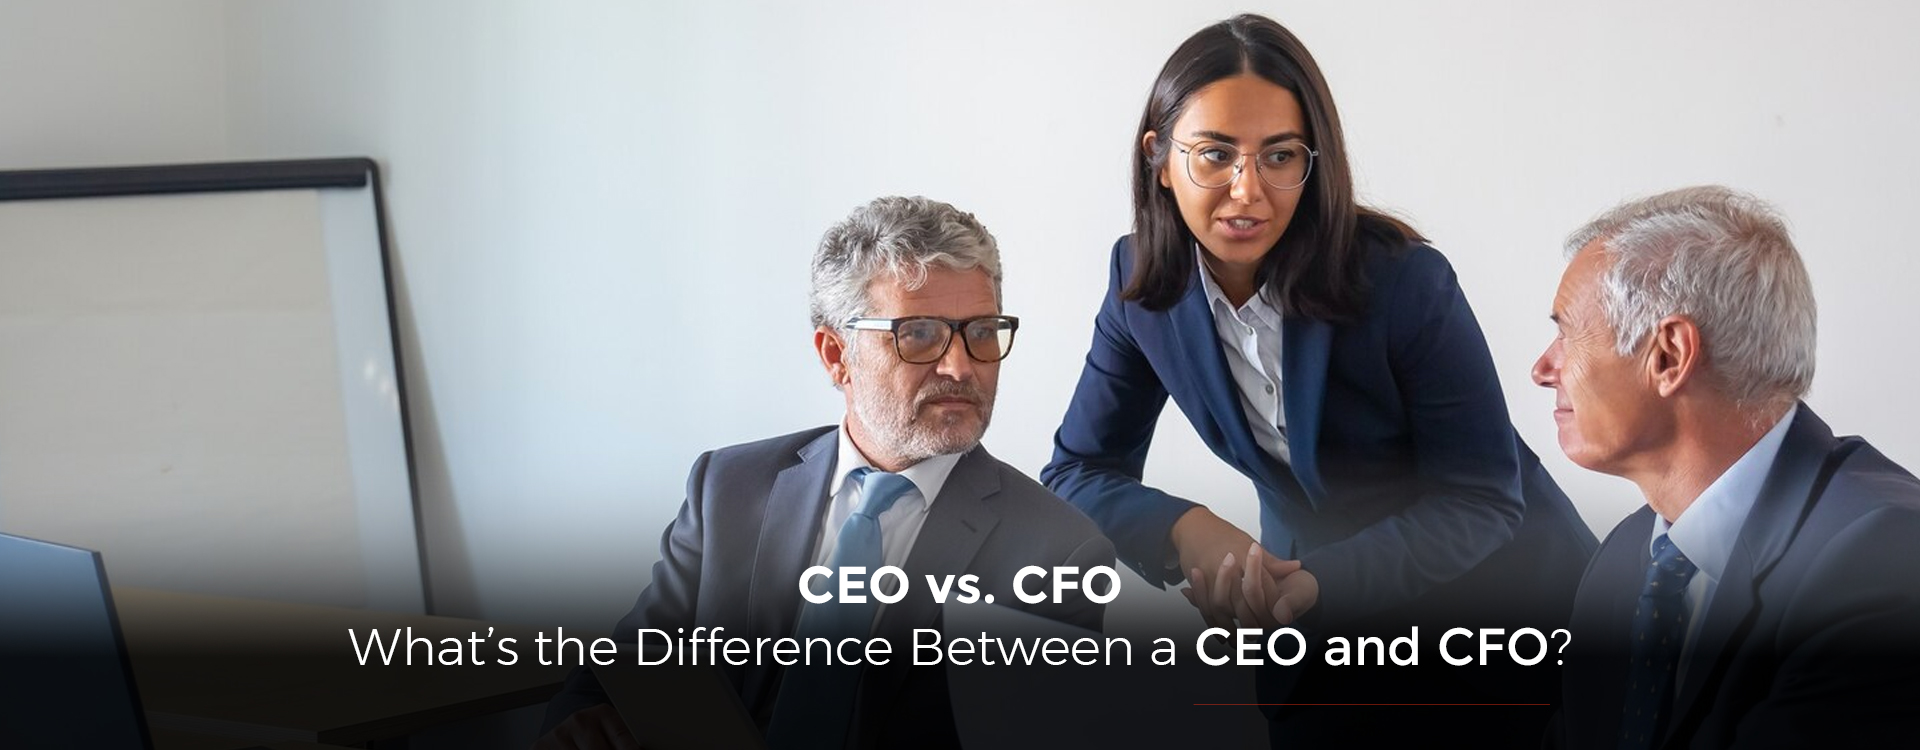 CEO vs. CFO: What’s the Difference Between a CEO and CFO?